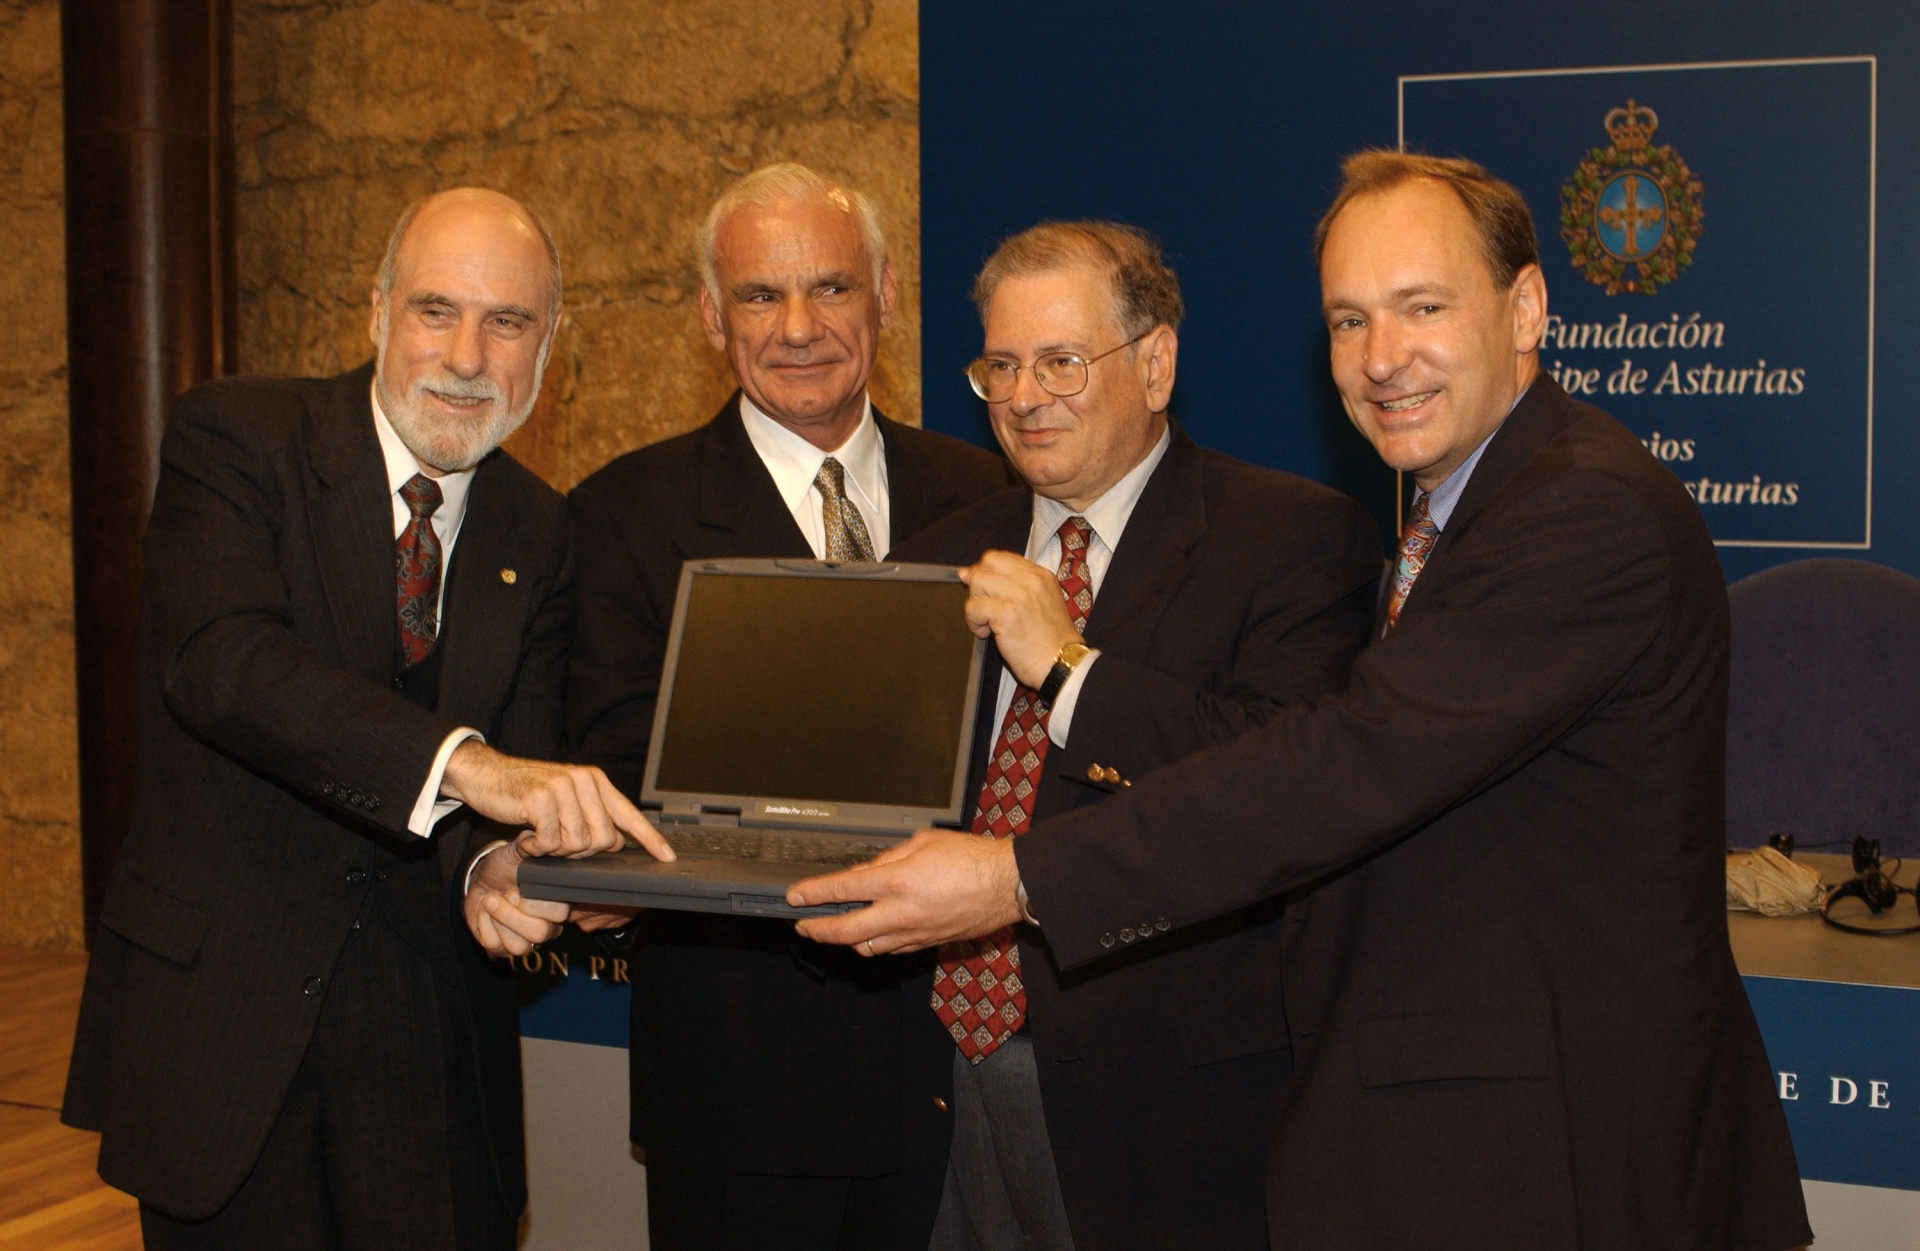 Internet pioneers Lawrence Roberts, Robert Kahn, Vinton Cerf and Tim Berners-Lee attend a media conference the day before they receive the Prince of Asturias award for Science and Technology investigation October 24, 2002 in Oviedo, Spain.Photo: Getty Ima